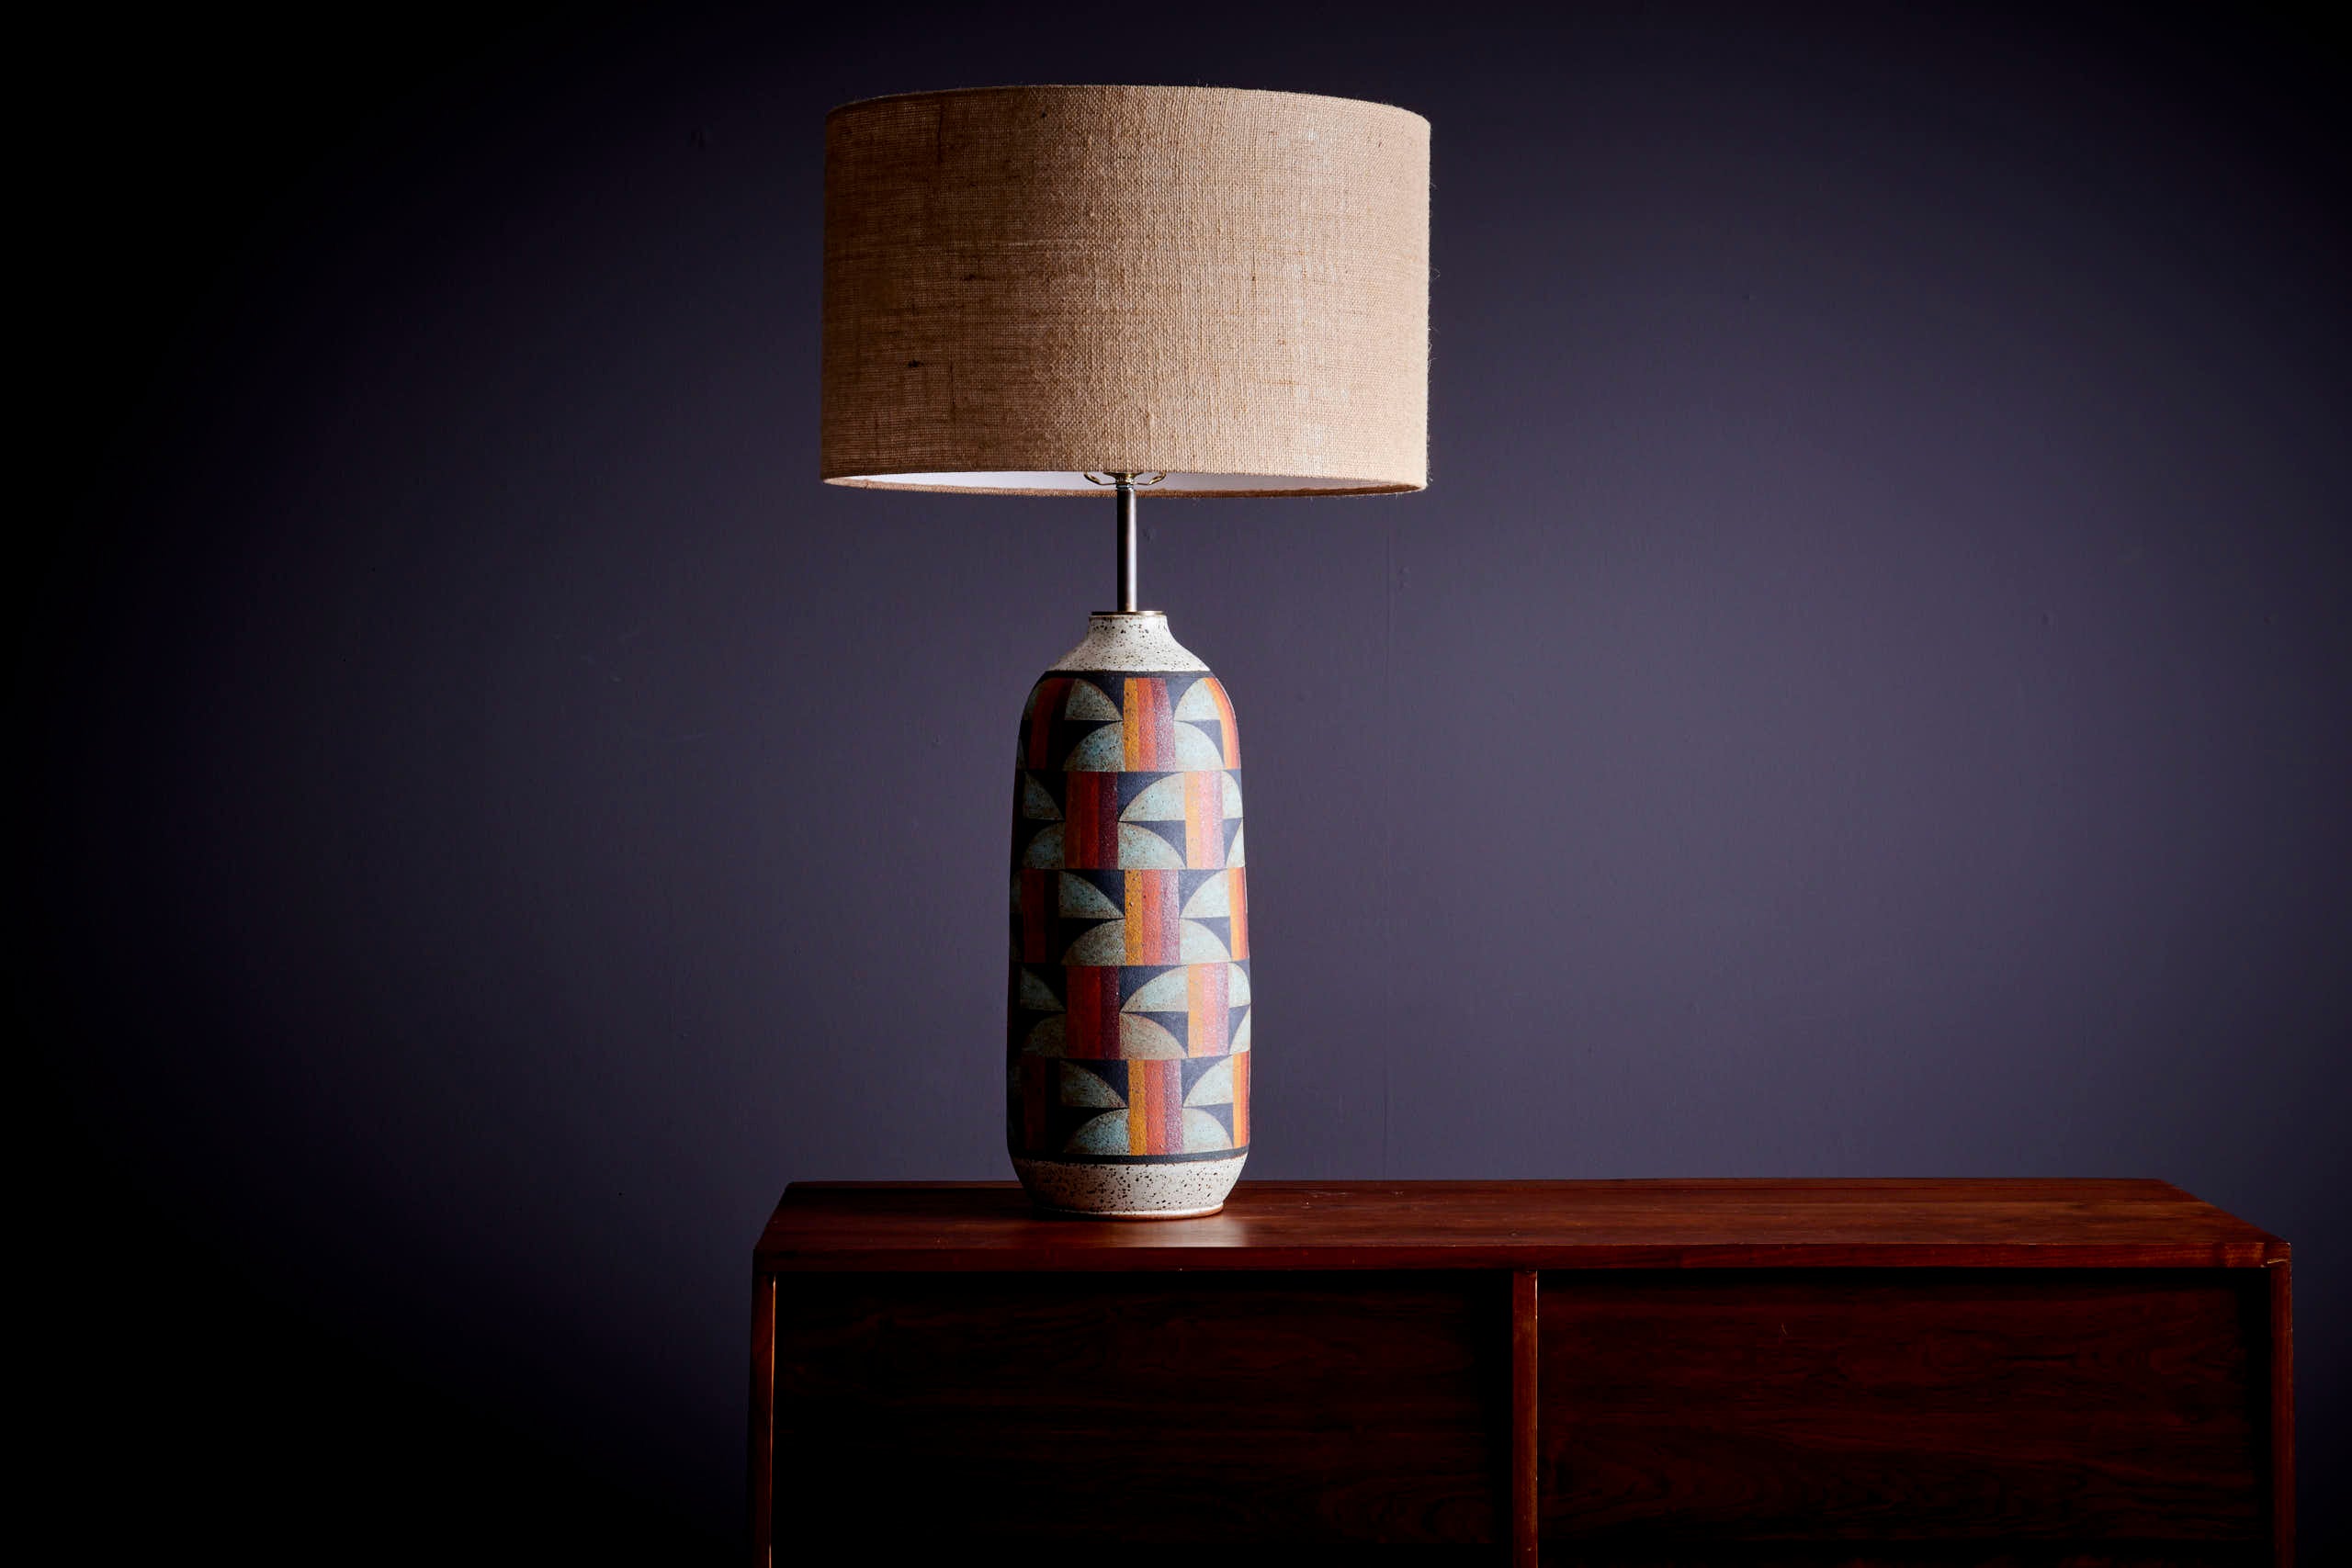 Kat & Roger Table Lamp with hand-crafted and hand-painted ceramic base, USA. Measurements given apply to the base of the lamp. 

Nestled amidst the serene landscapes of Southern California, ceramic artists Kat Hutter and Roger Lee have been quietly